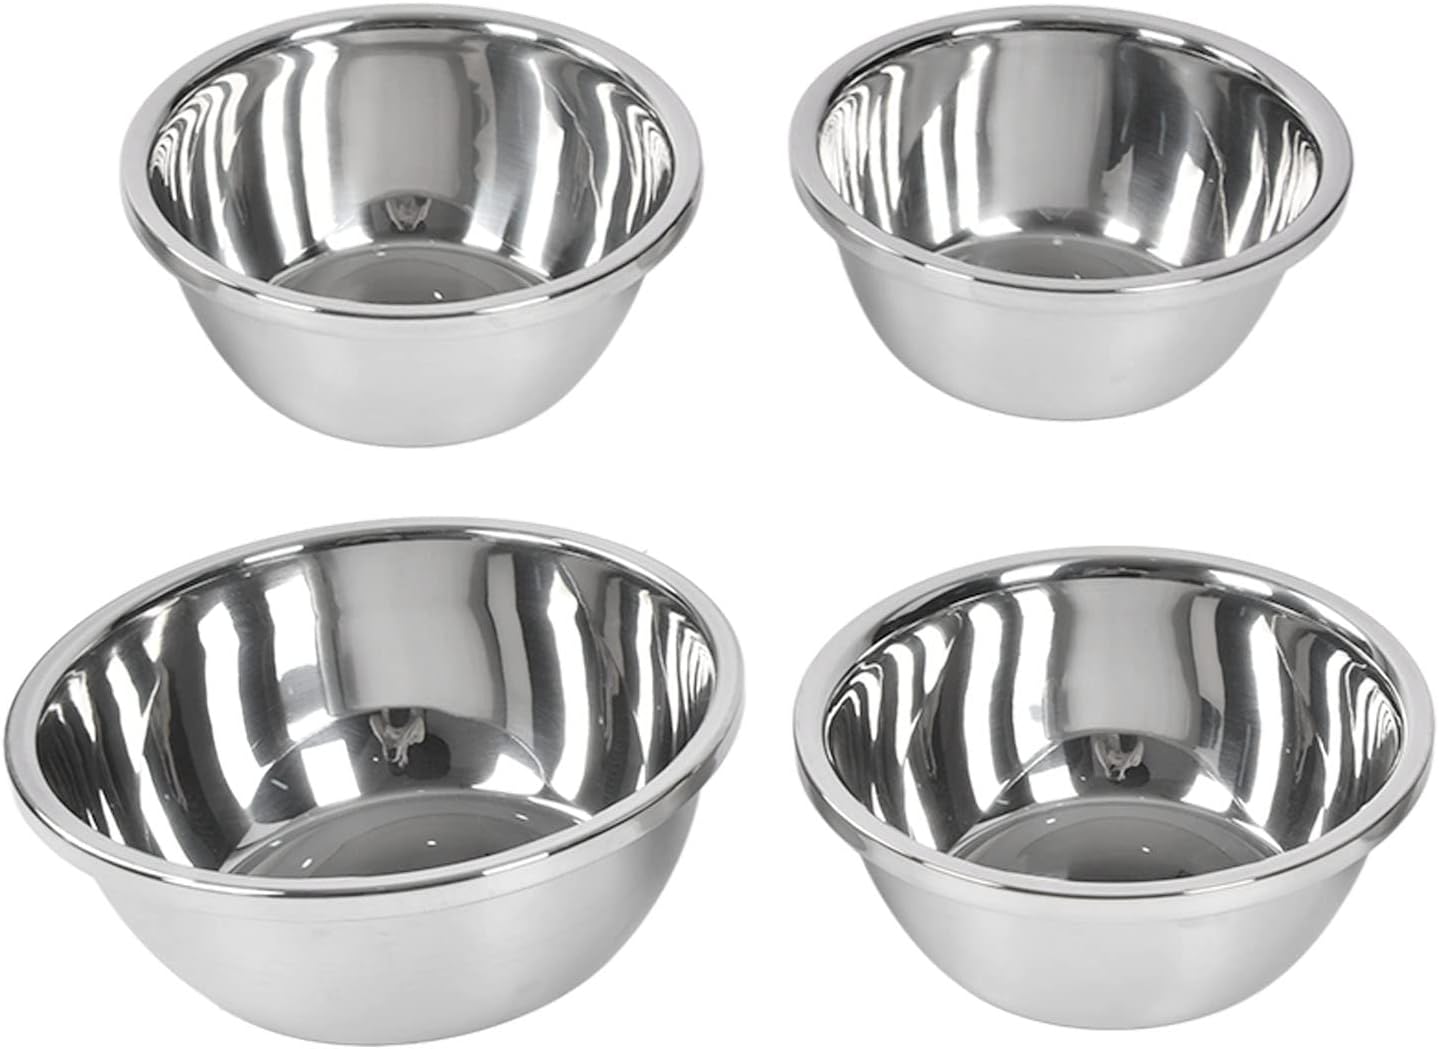 Stainless Steel Mixing Bowl Set (Set of 5) - Home Essentials Store